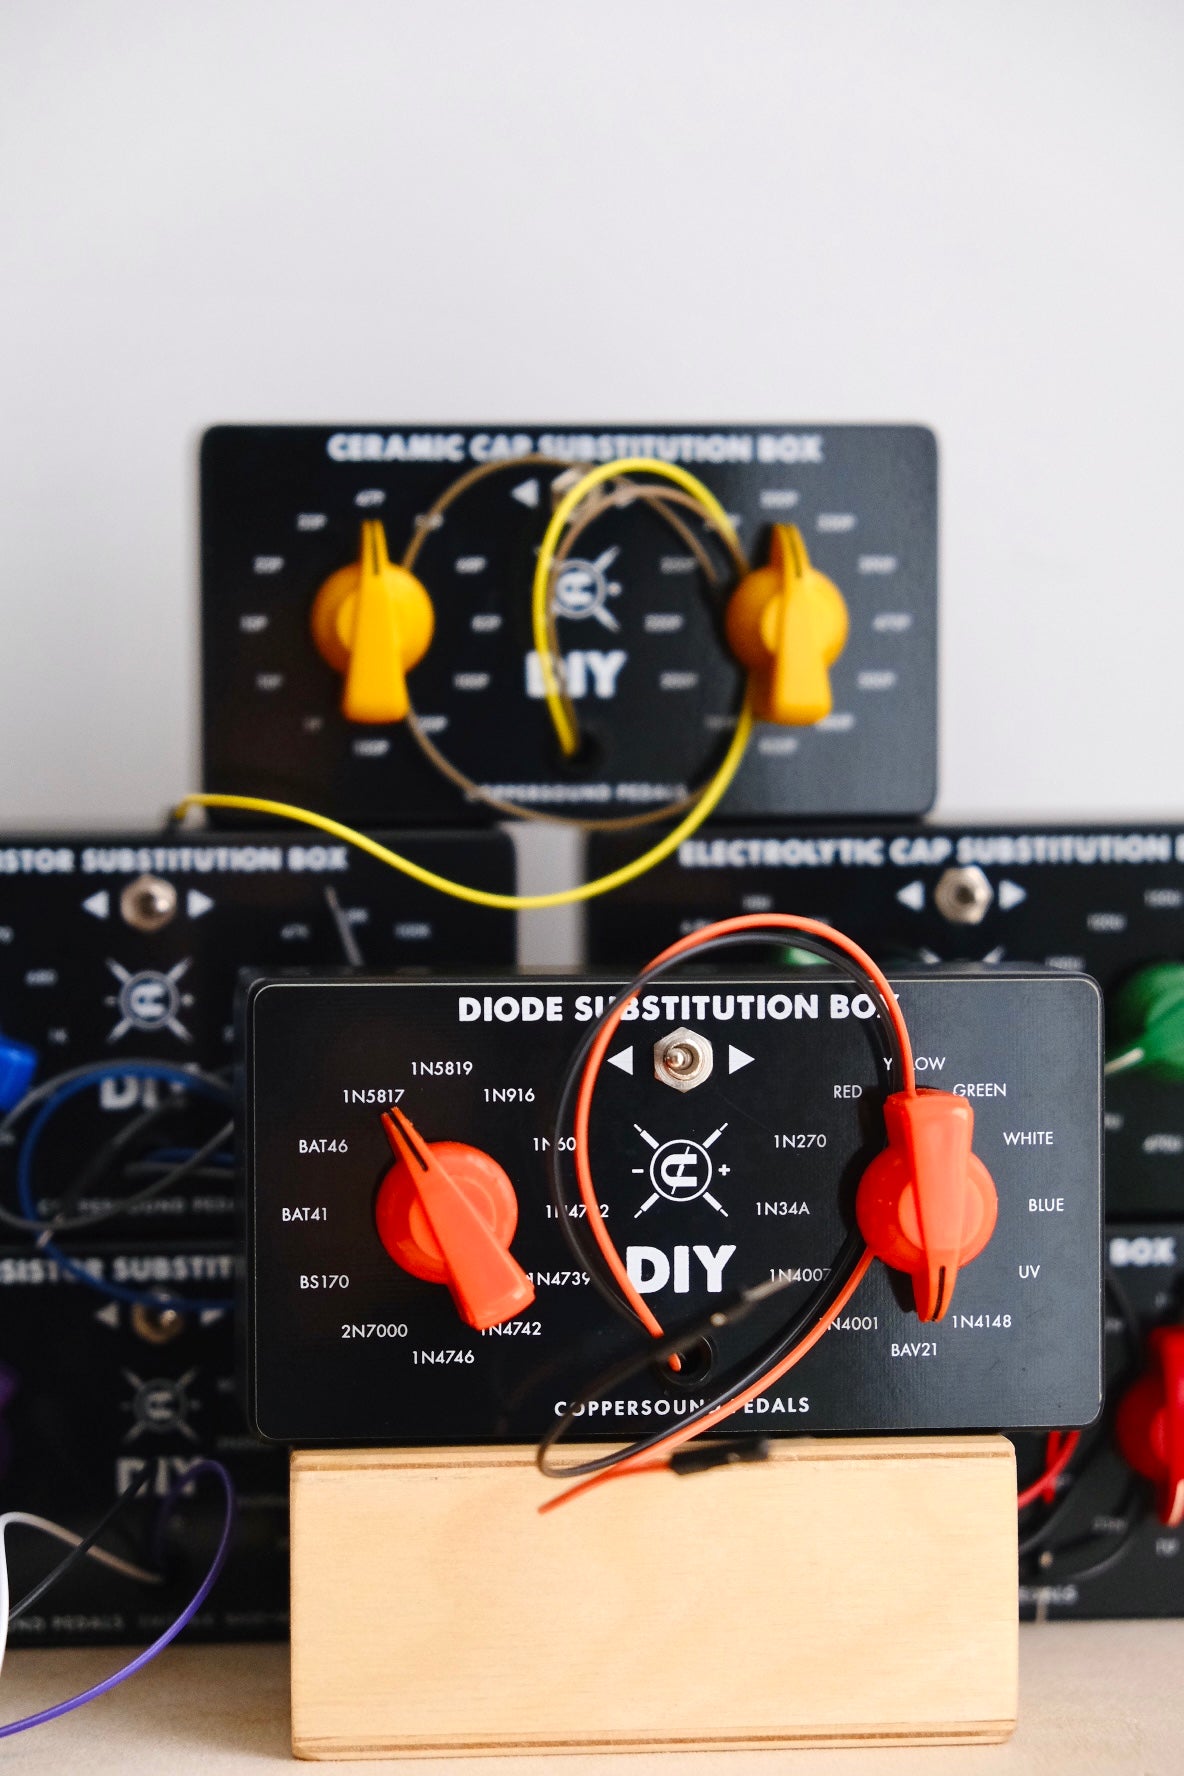 Coppersound DIY Diode Substitution Box